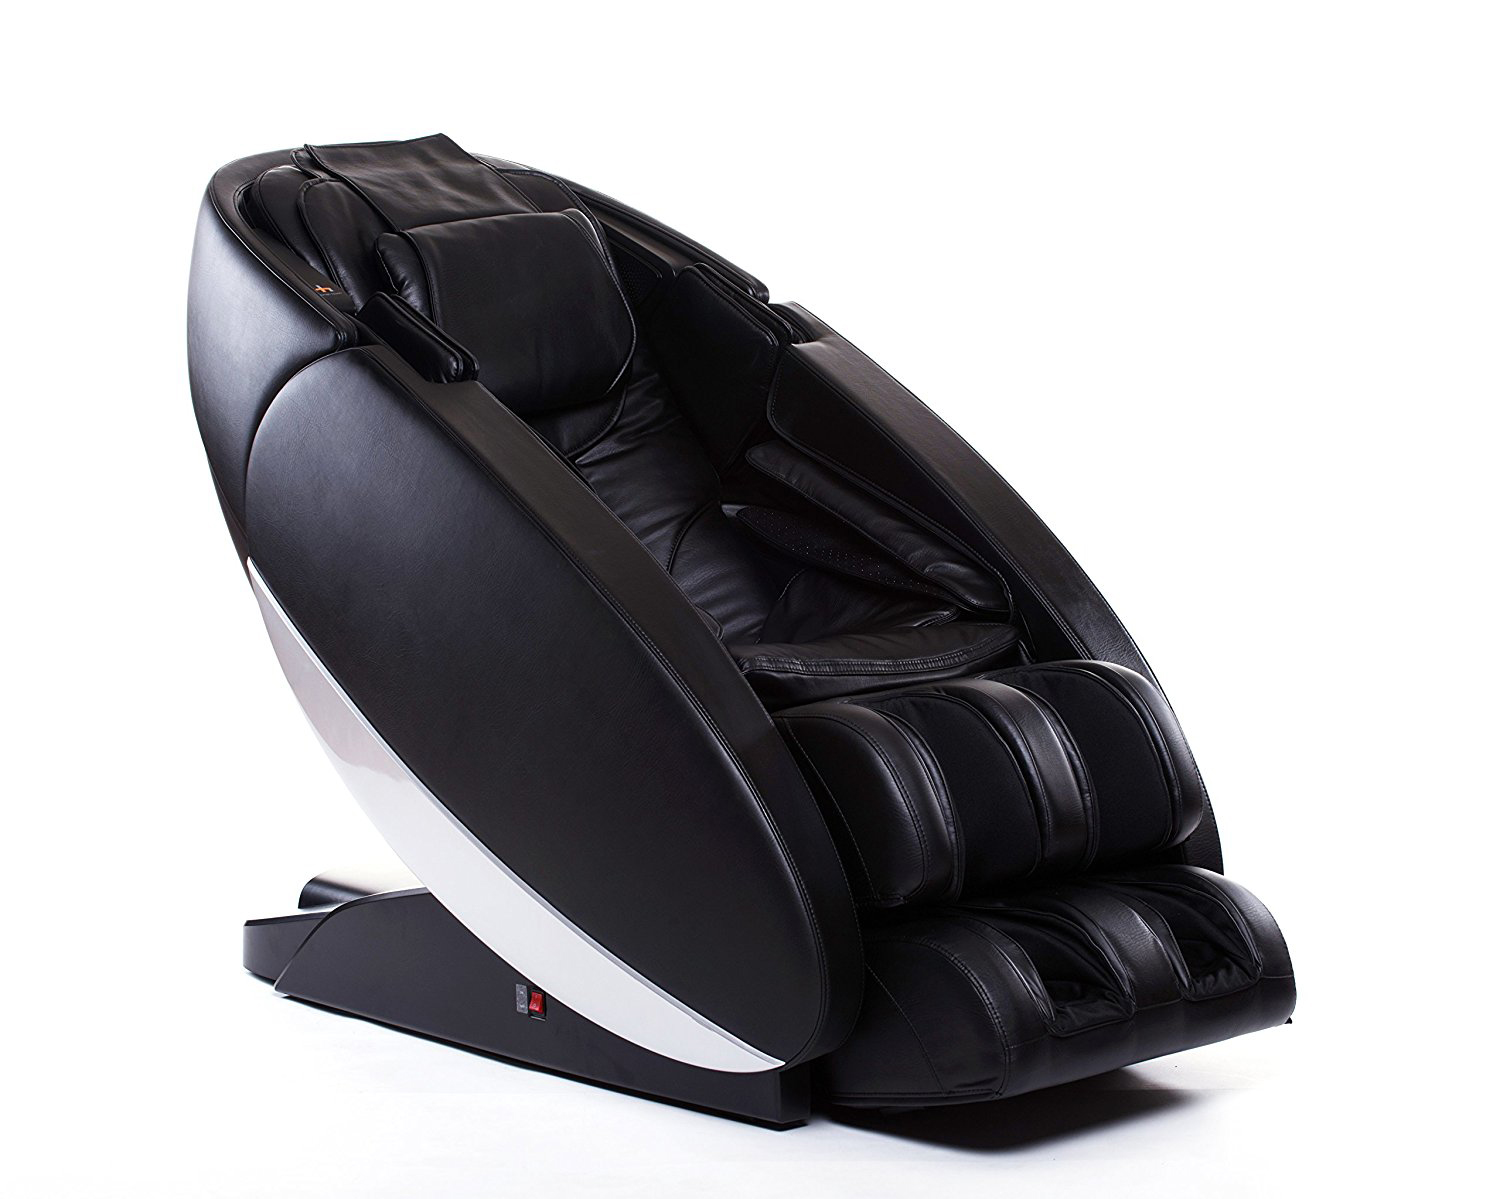 Black 100-NOVOXT-001 Human  Touch Novo XT Zero Gravity Massage Chair Recliner with In-Home Delivery